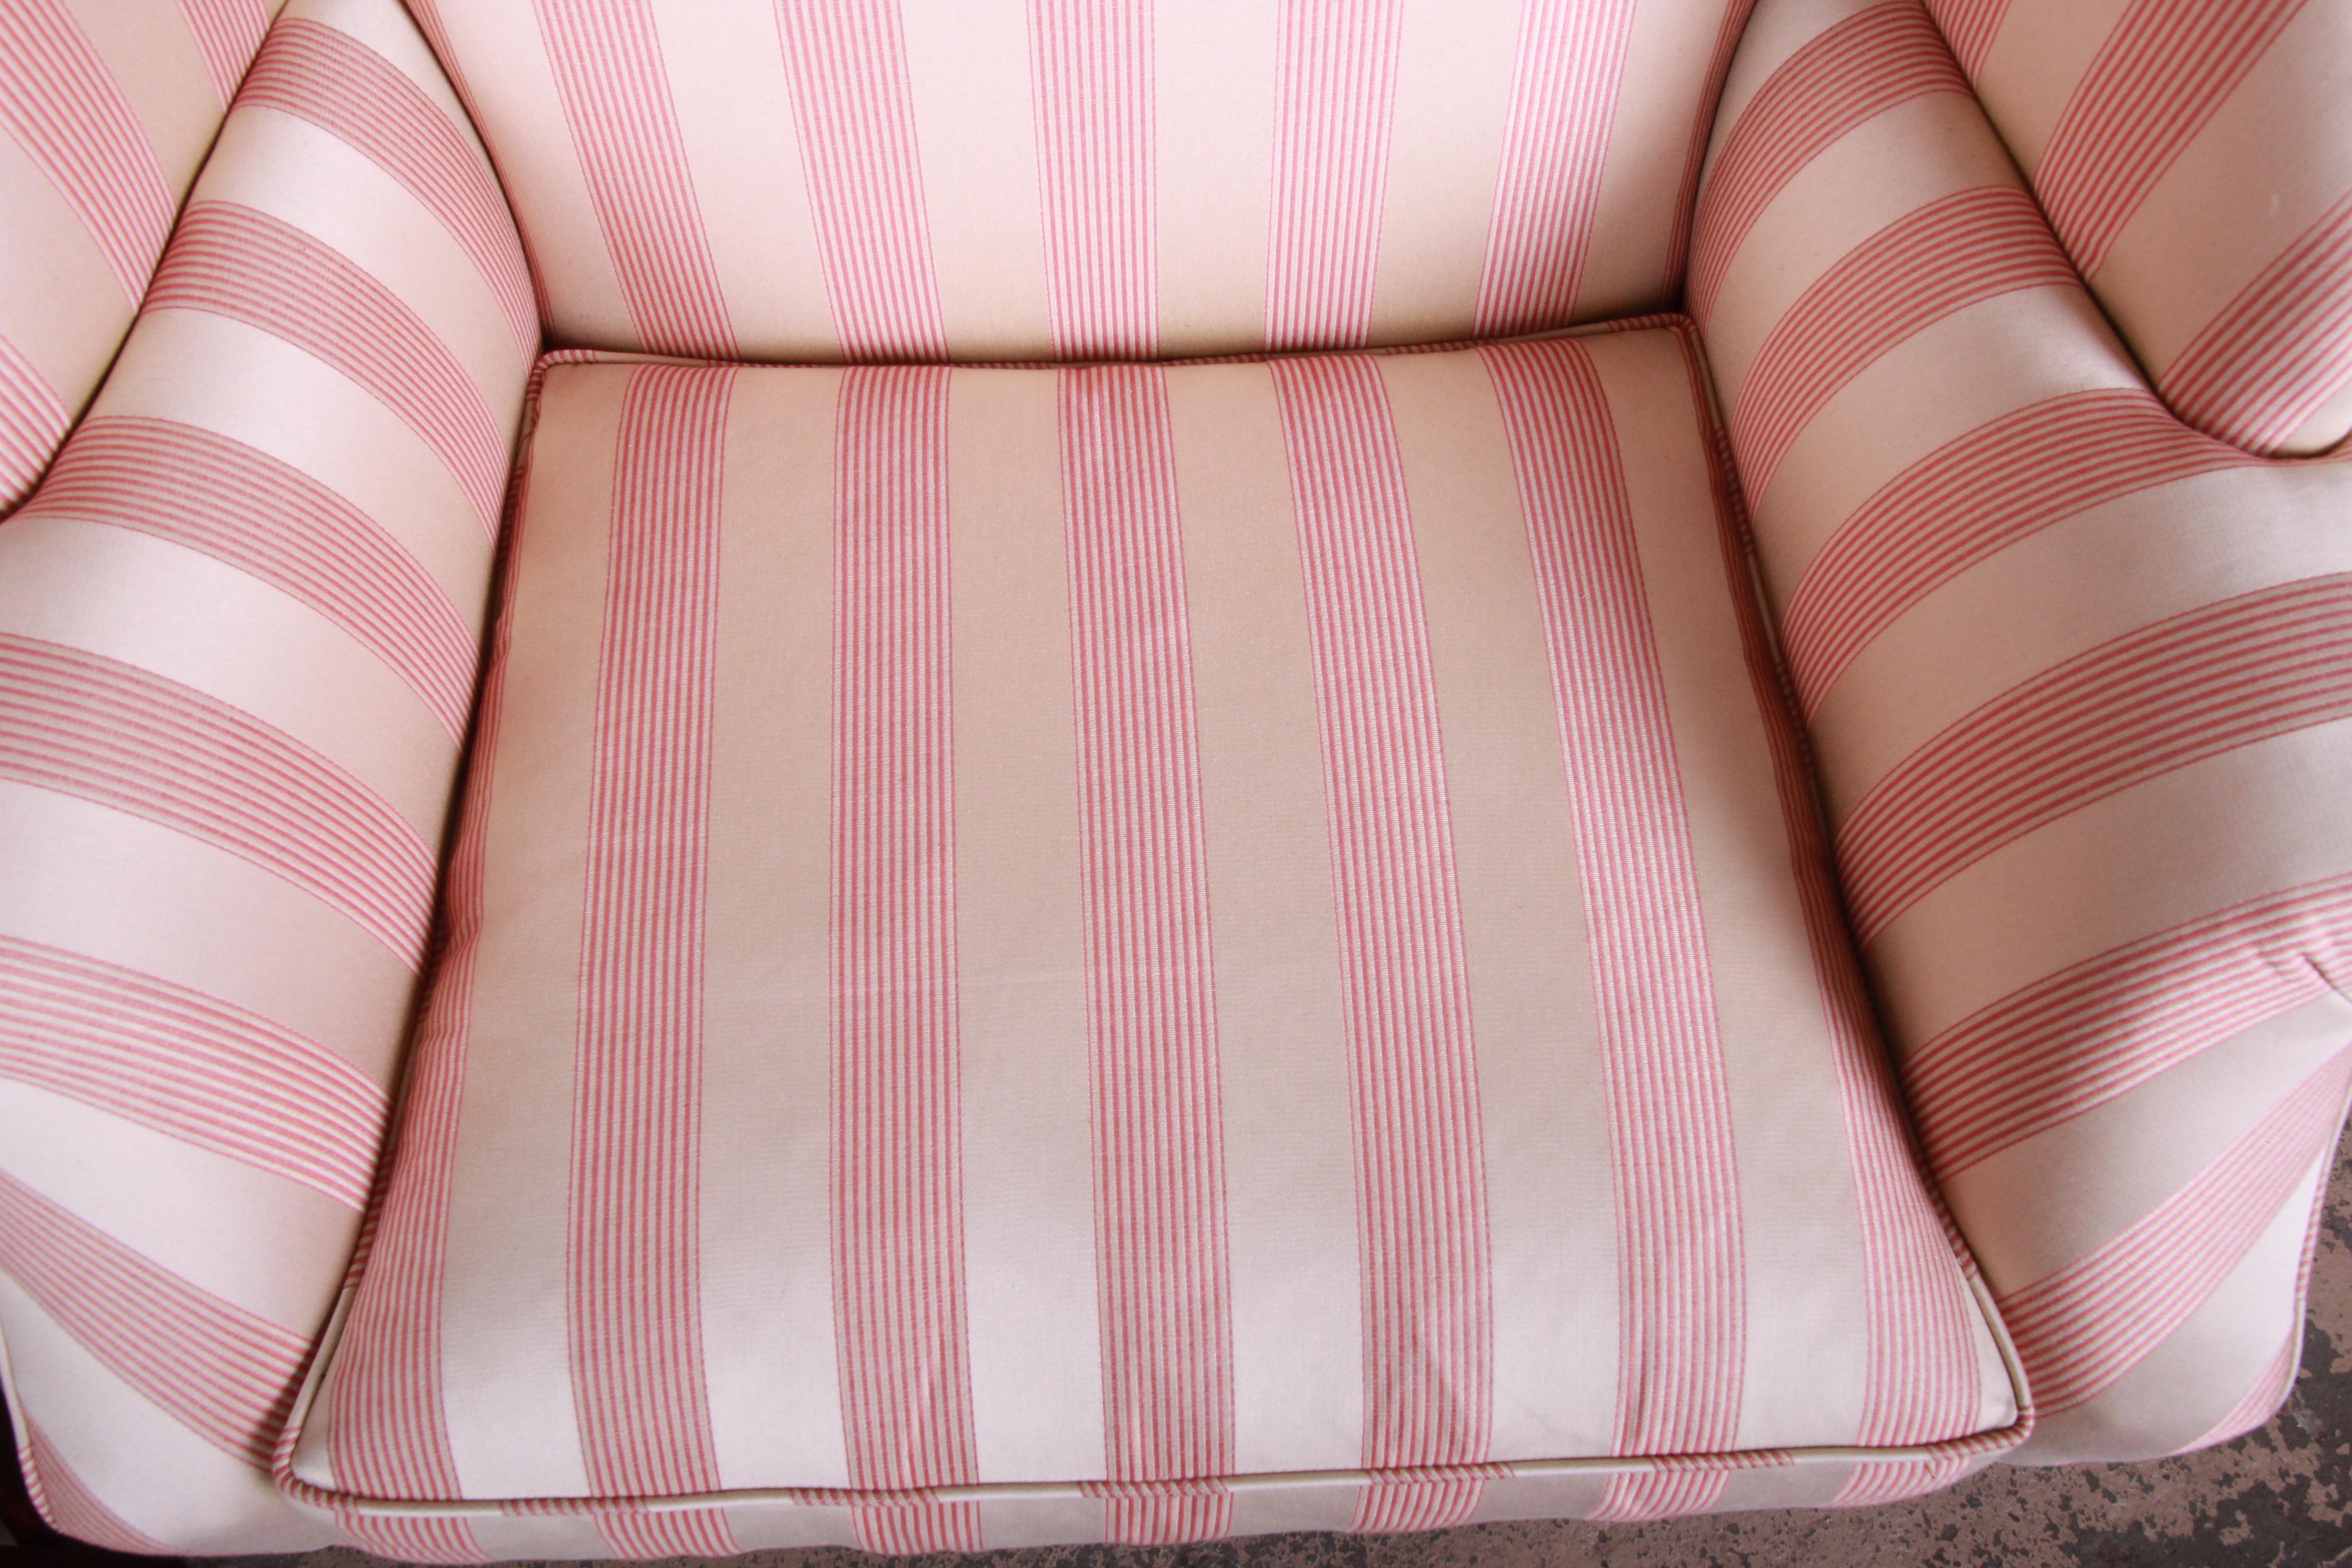 A gorgeous wingback lounge chair by Baker Furniture. The chair features solid mahogany tapered legs, scrolled arms, and beautiful original upholstery in cream with pink stripes. A very comfortable and elegant chair. It is made with the highest